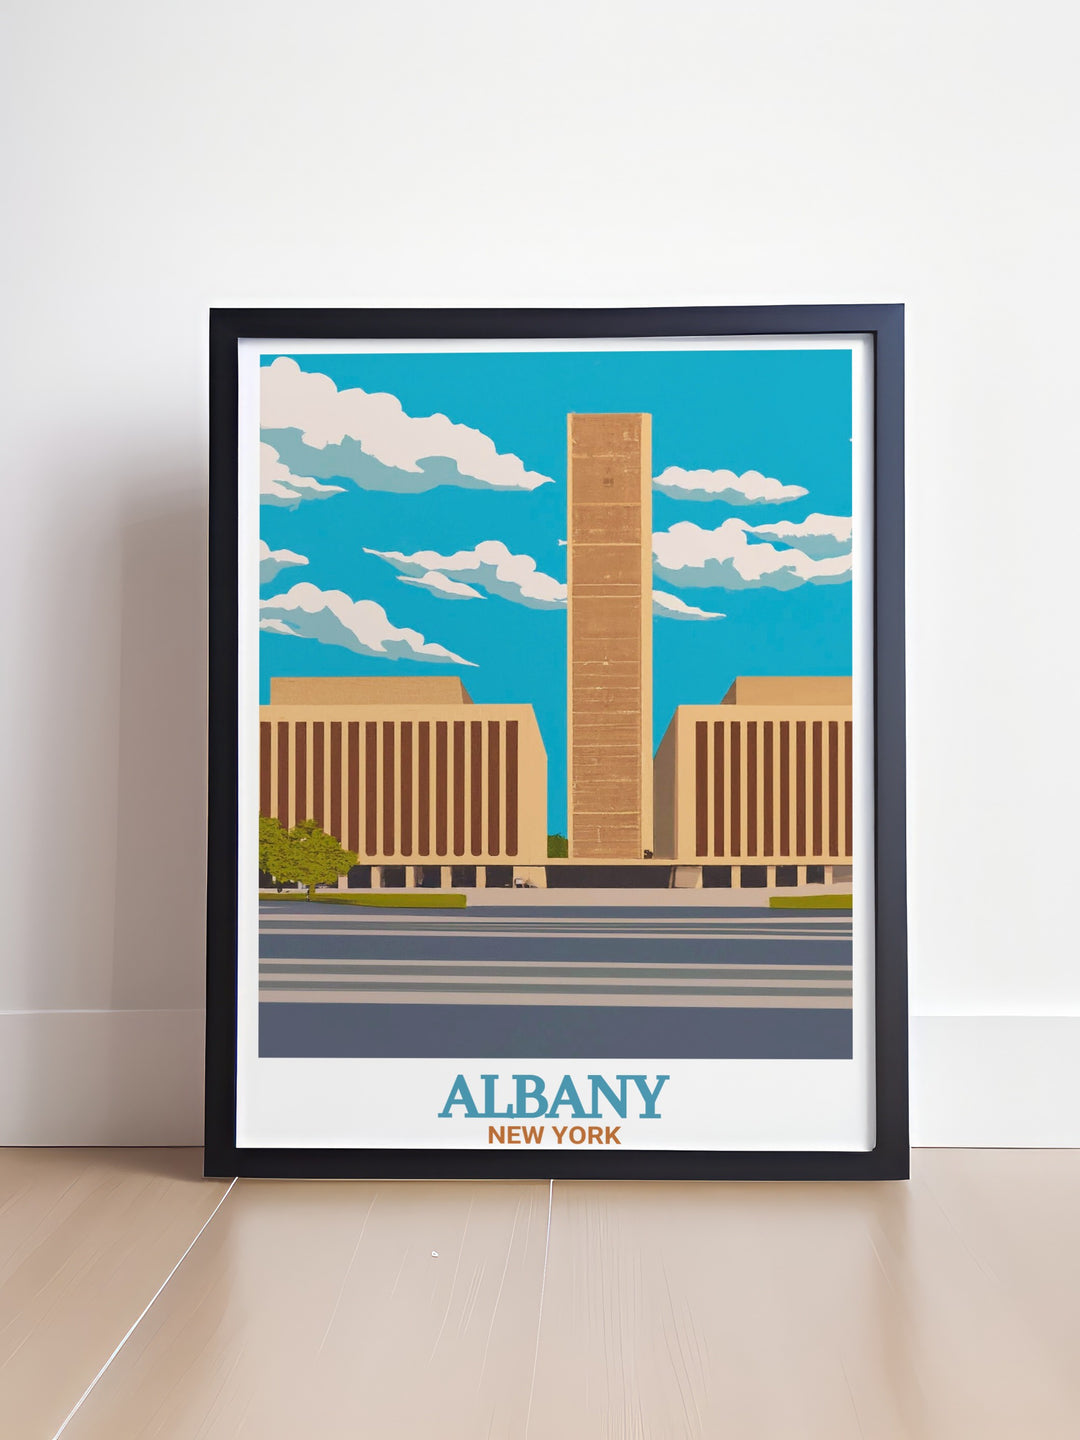 Empire State Plaza travel poster featuring the dynamic spirit and architectural grandeur of Albany ideal for those seeking New York State art and unique Albany gifts to enhance their home or office decor with captivating wall art.